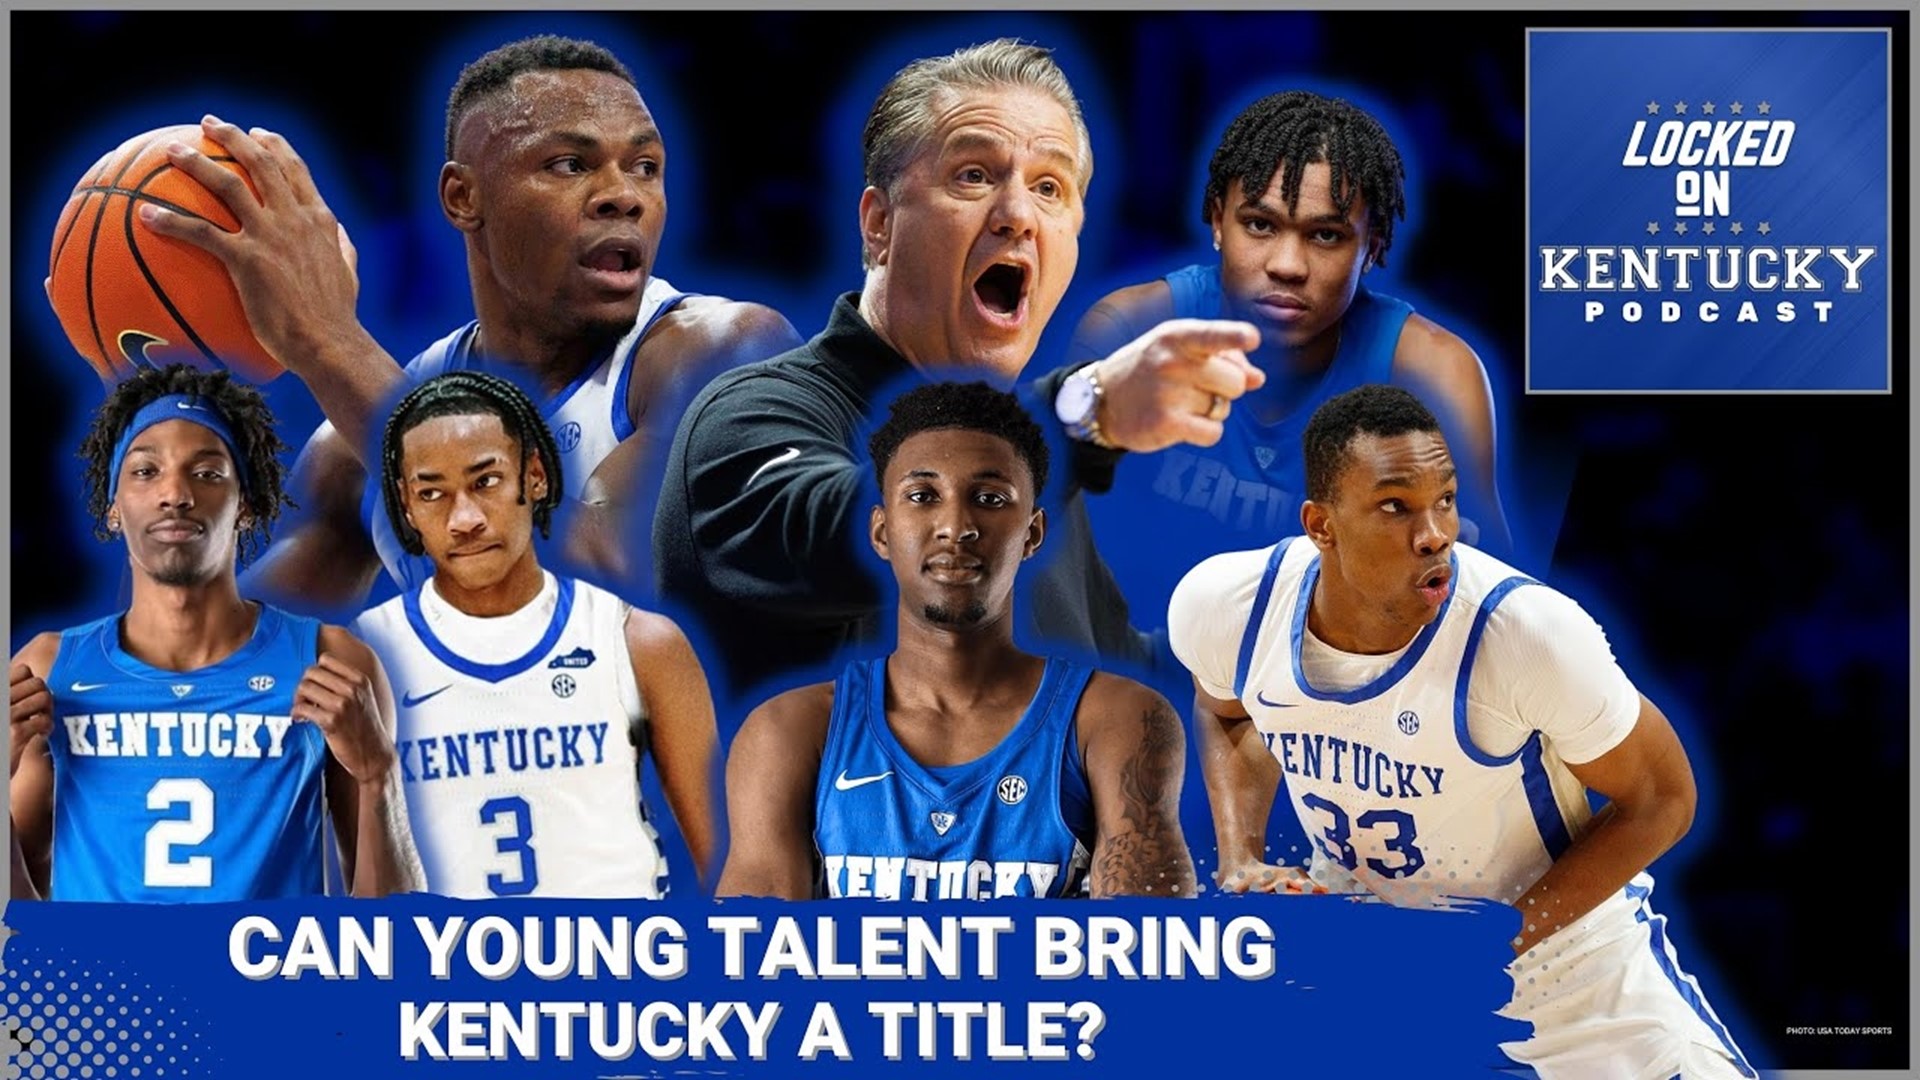 According to recent historical trends, Kentucky basketball won't win a national title this upcoming season.